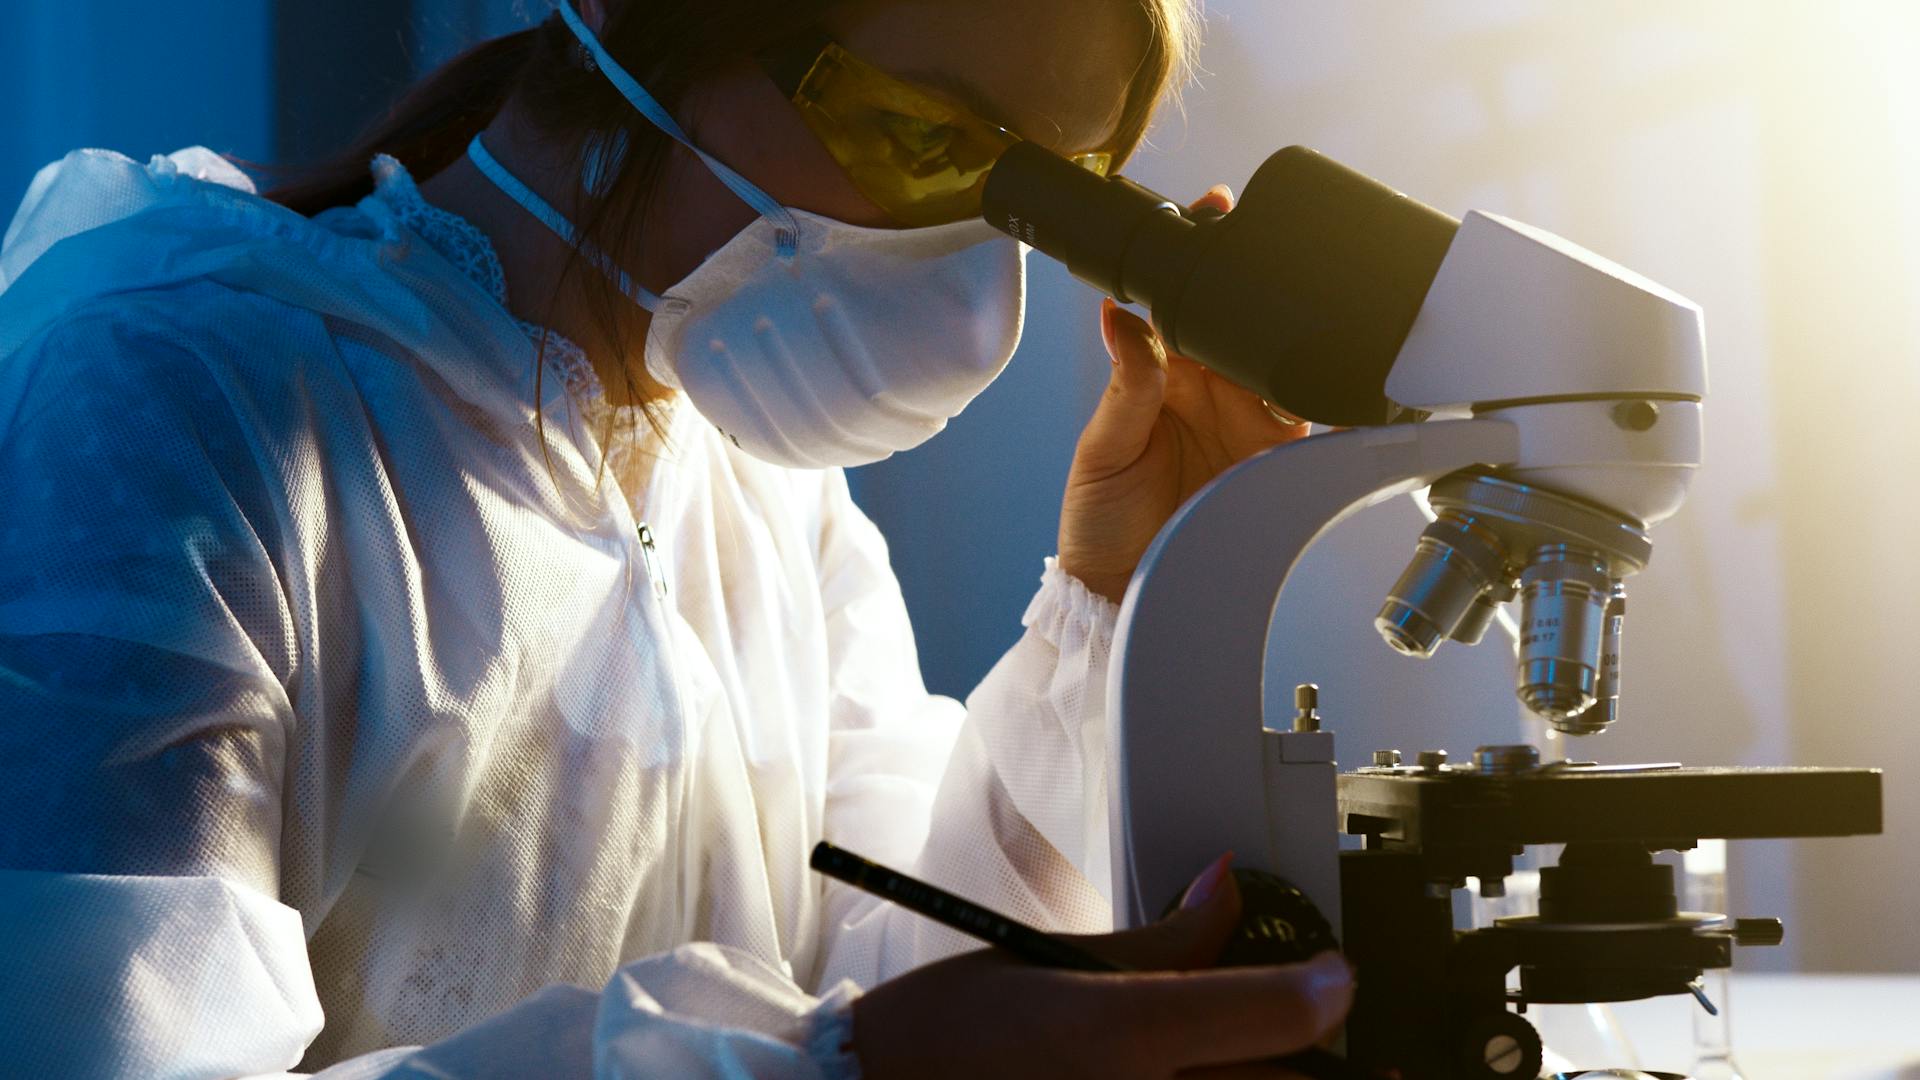 Photo Of Woman Looking Through Microscope